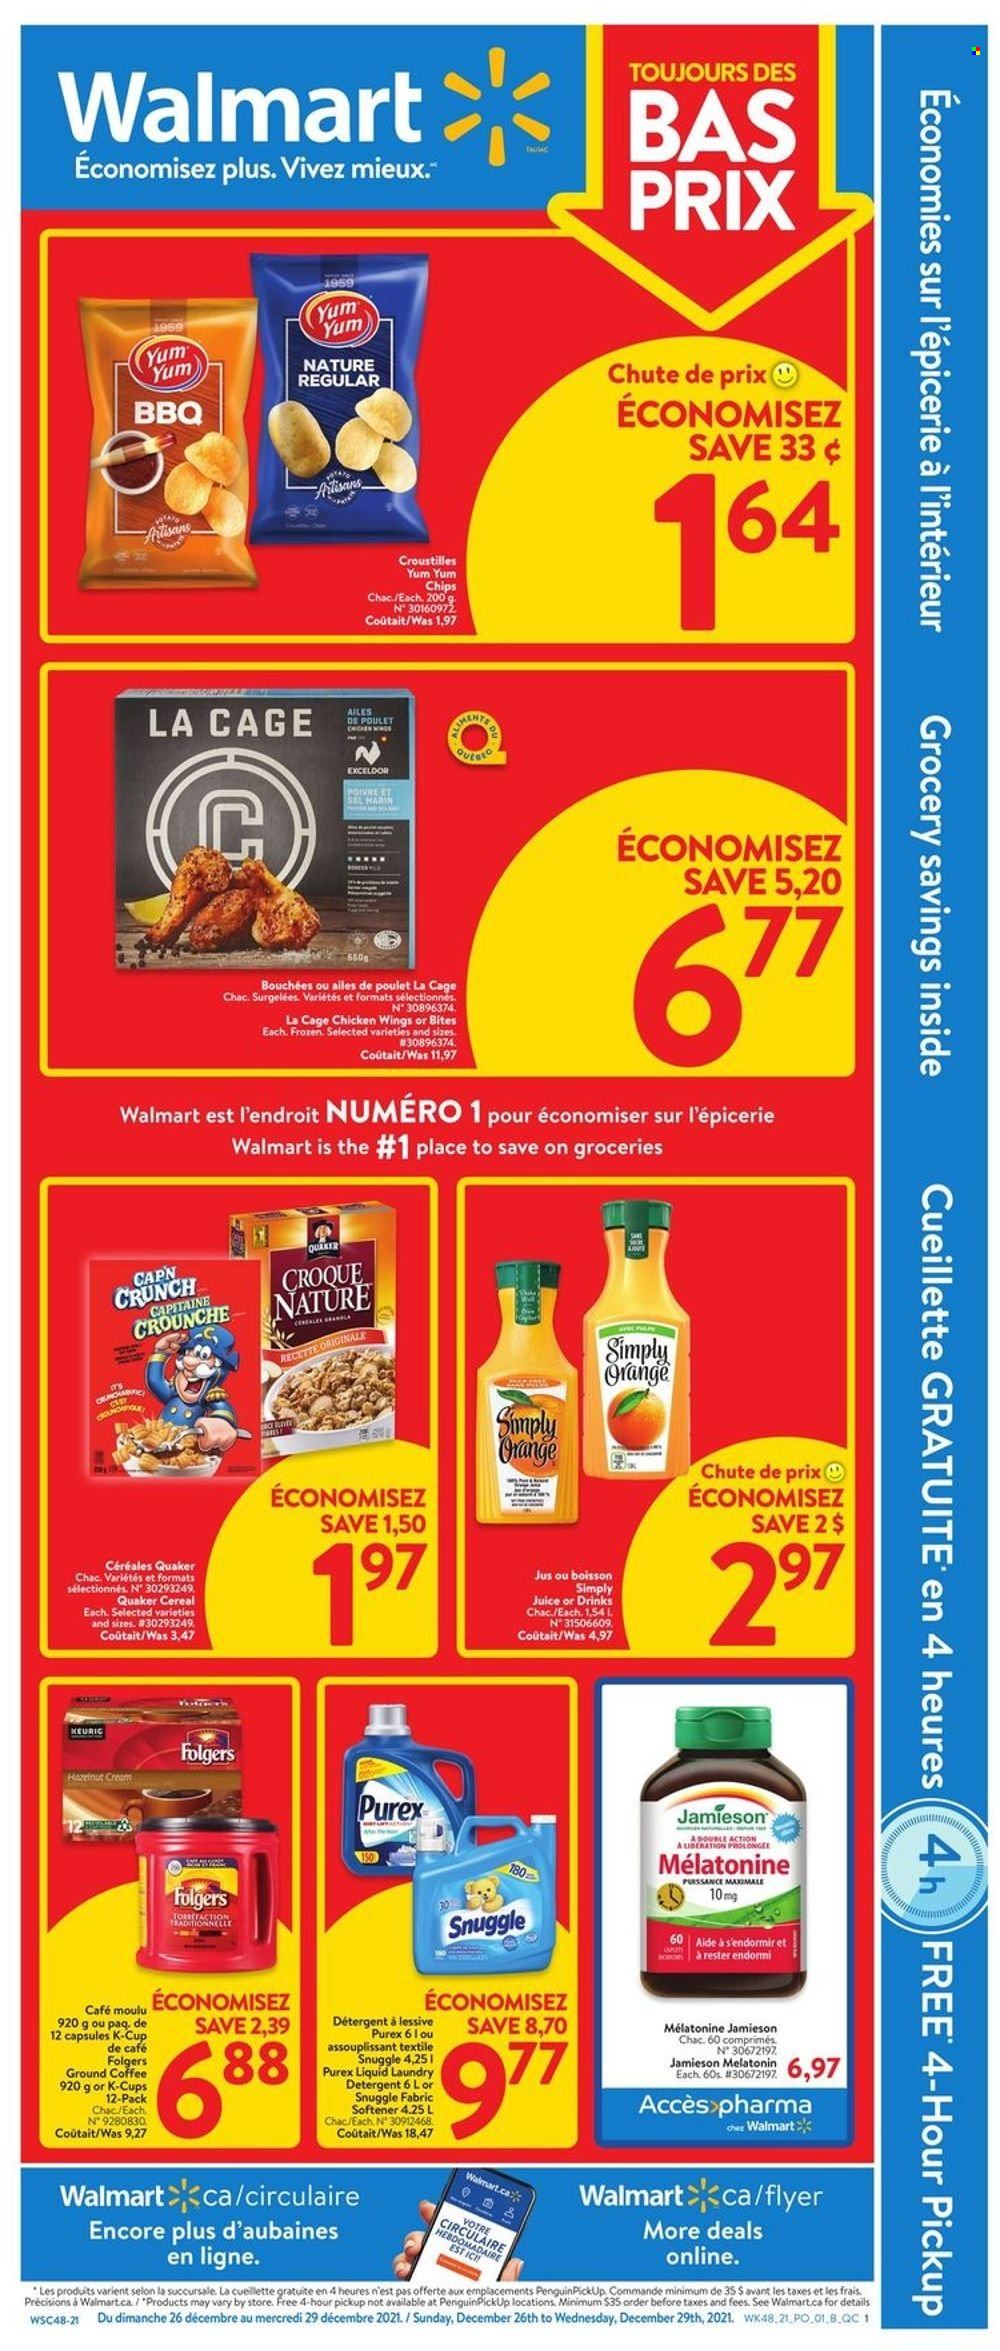 Walmart Flyer - December 26, 2021 - December 29, 2021 - Sales products - Quaker, chicken wings, cereals, juice, coffee, Folgers, ground coffee, coffee capsules, L'Or, K-Cups, Snuggle, fabric softener, laundry detergent, Purex, cage, Melatonin, detergent, orange. Page 1.